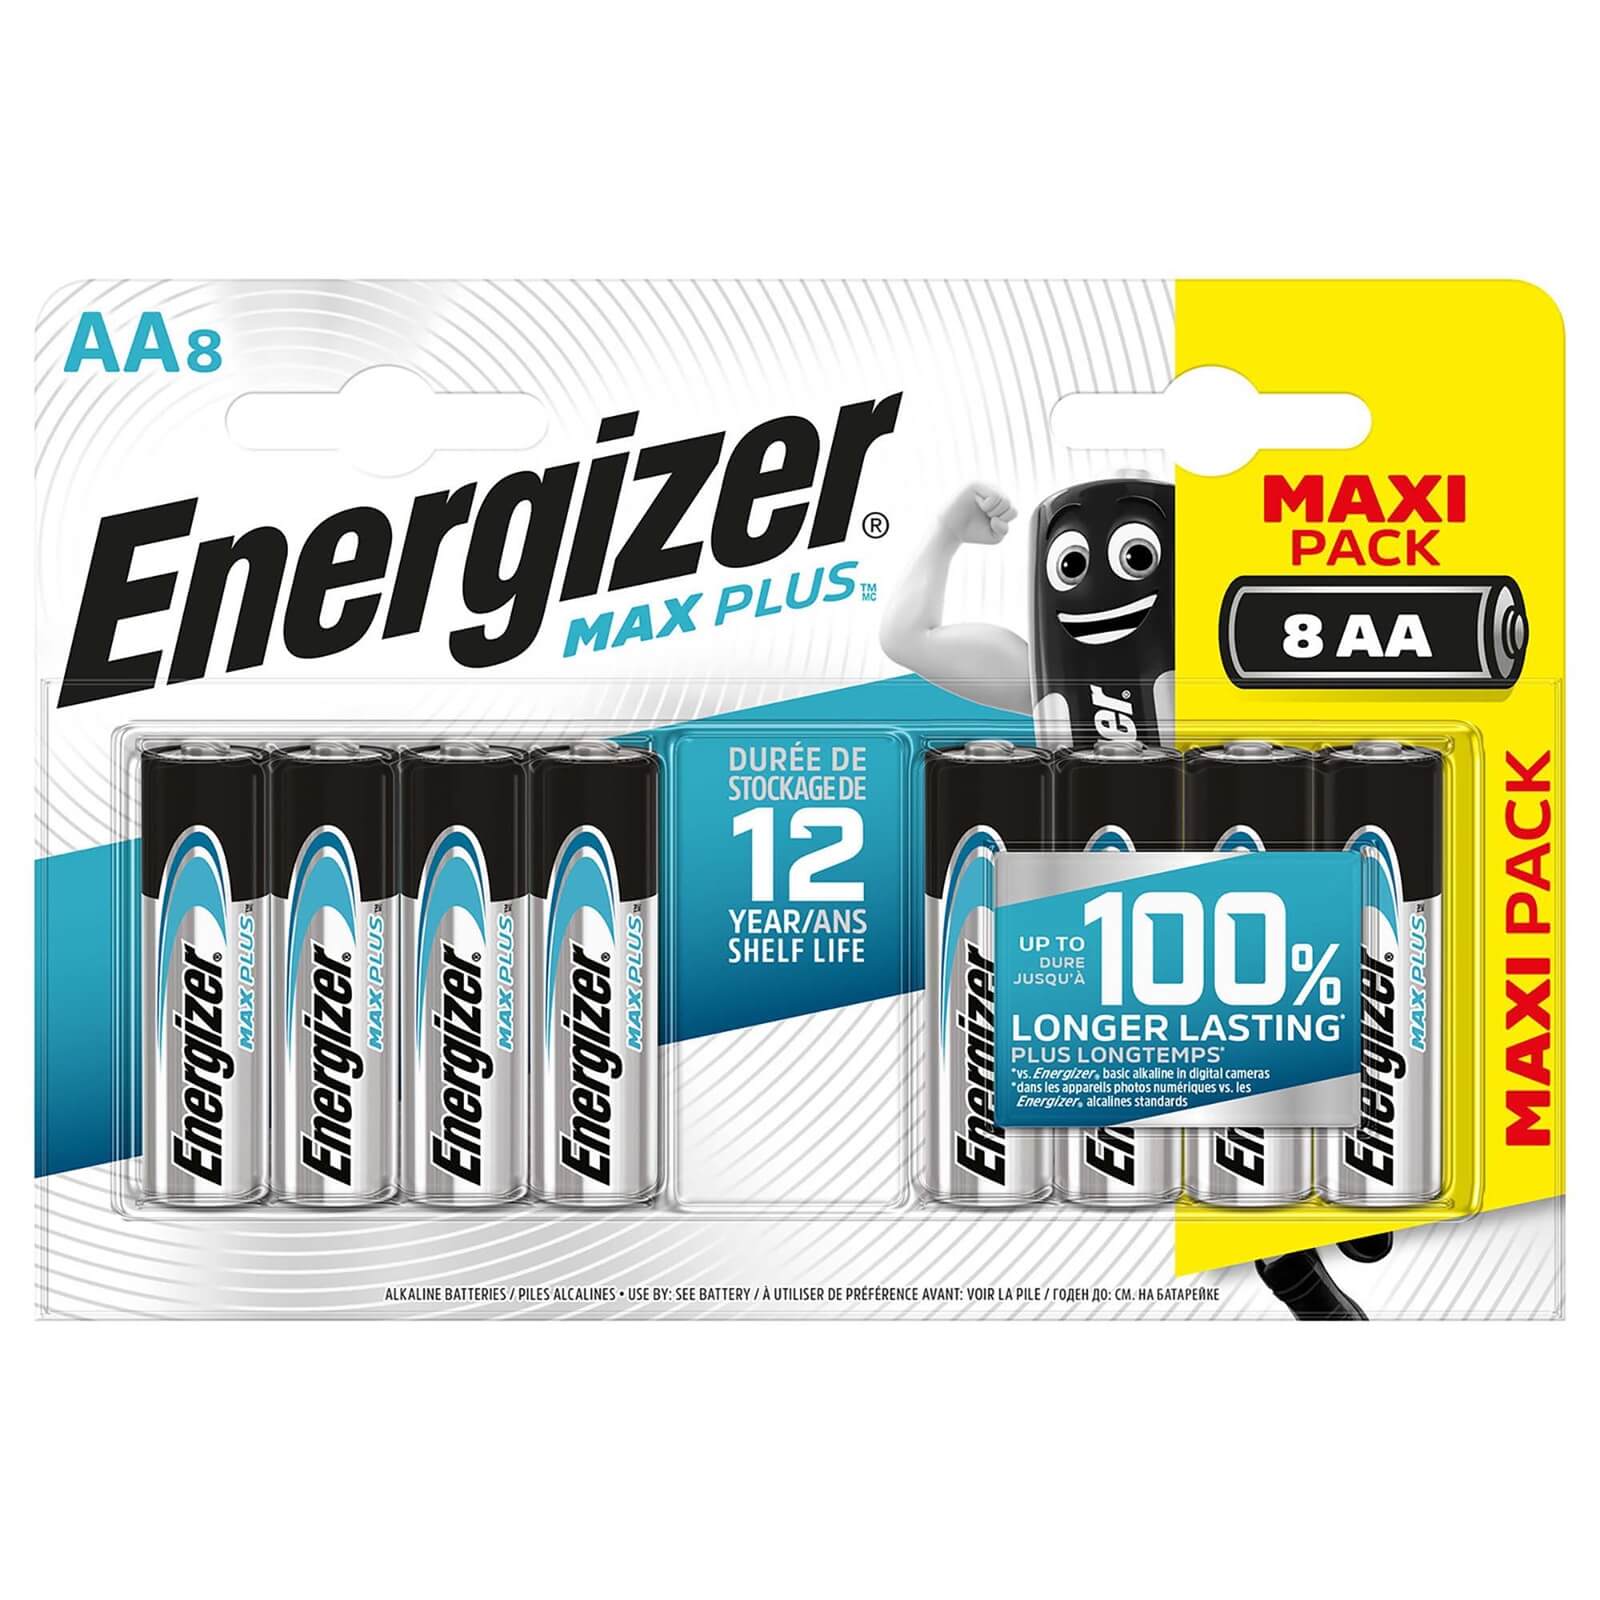 Photo of Energizer Max Plus Alkaline Aa Batteries - 8 Pack